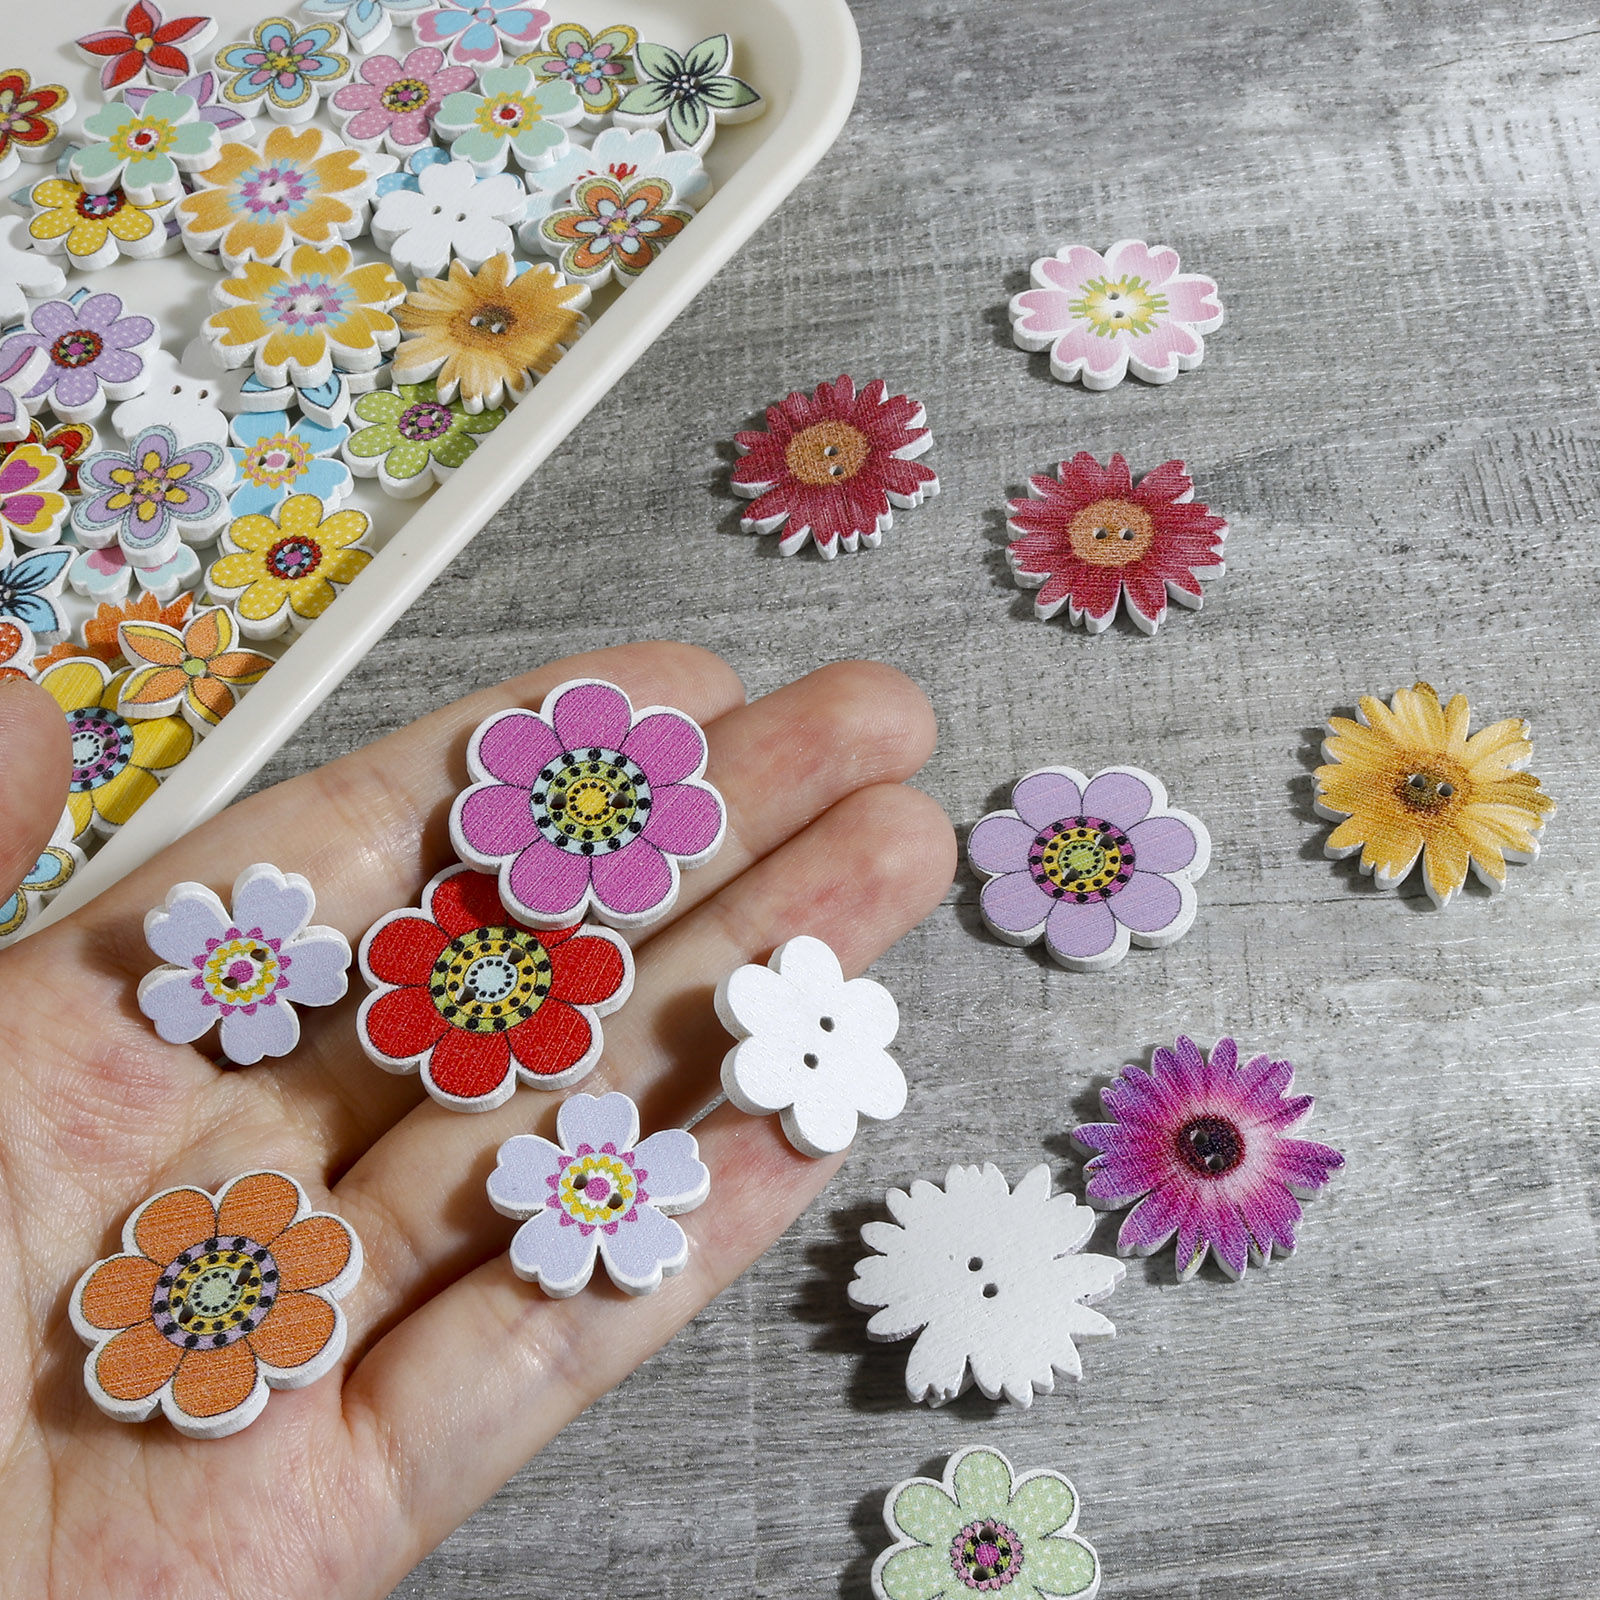 Picture of Wood Flora Collection Buttons Scrapbooking 2 Holes Flower At Random Color